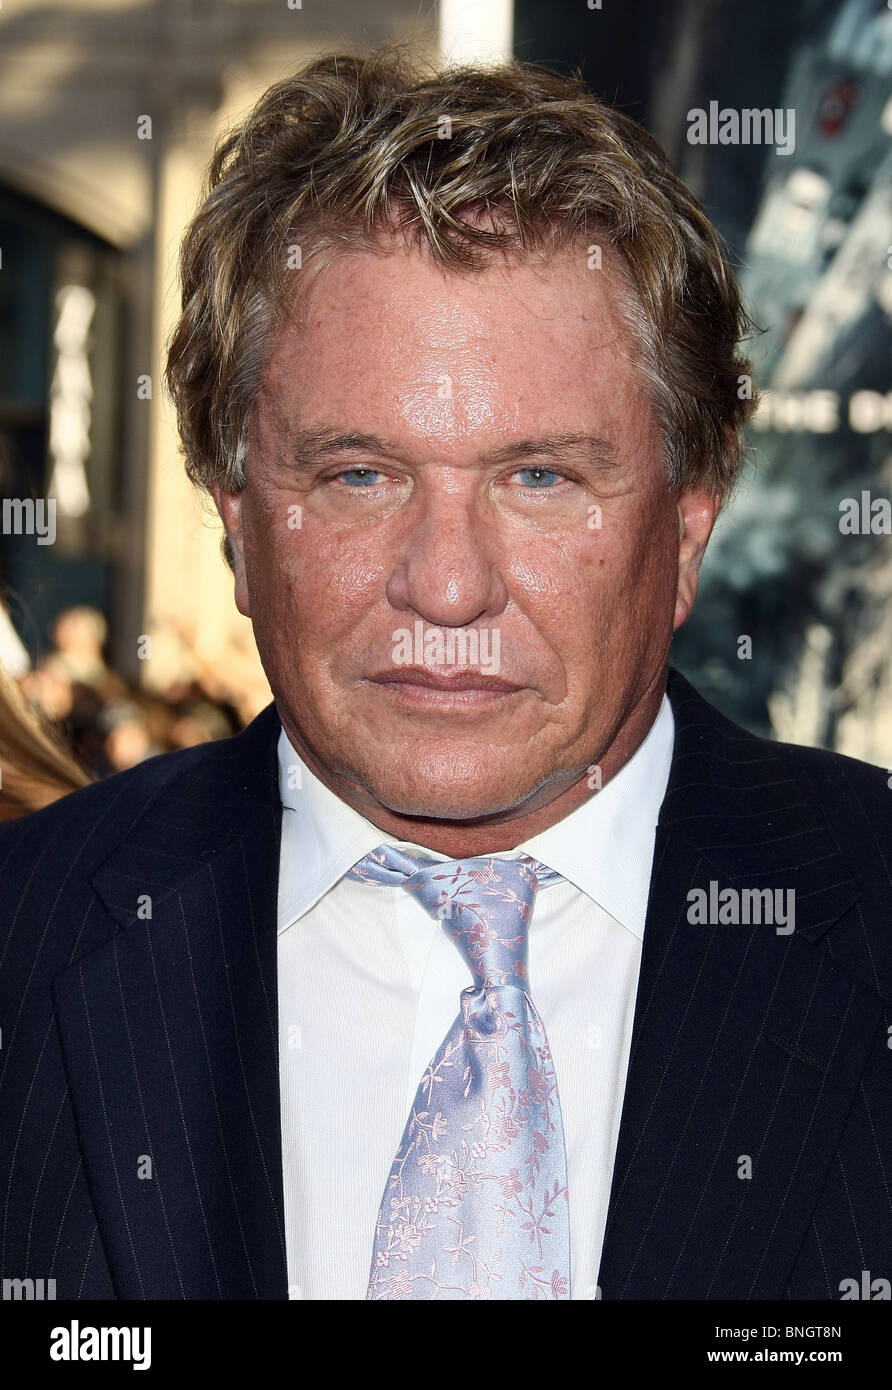 TOM BERENGER INCEPTION LOS ANGELES PREMIERE LOS ANGELES CALIFORNIA USA 13 July 2010 Stock Photo